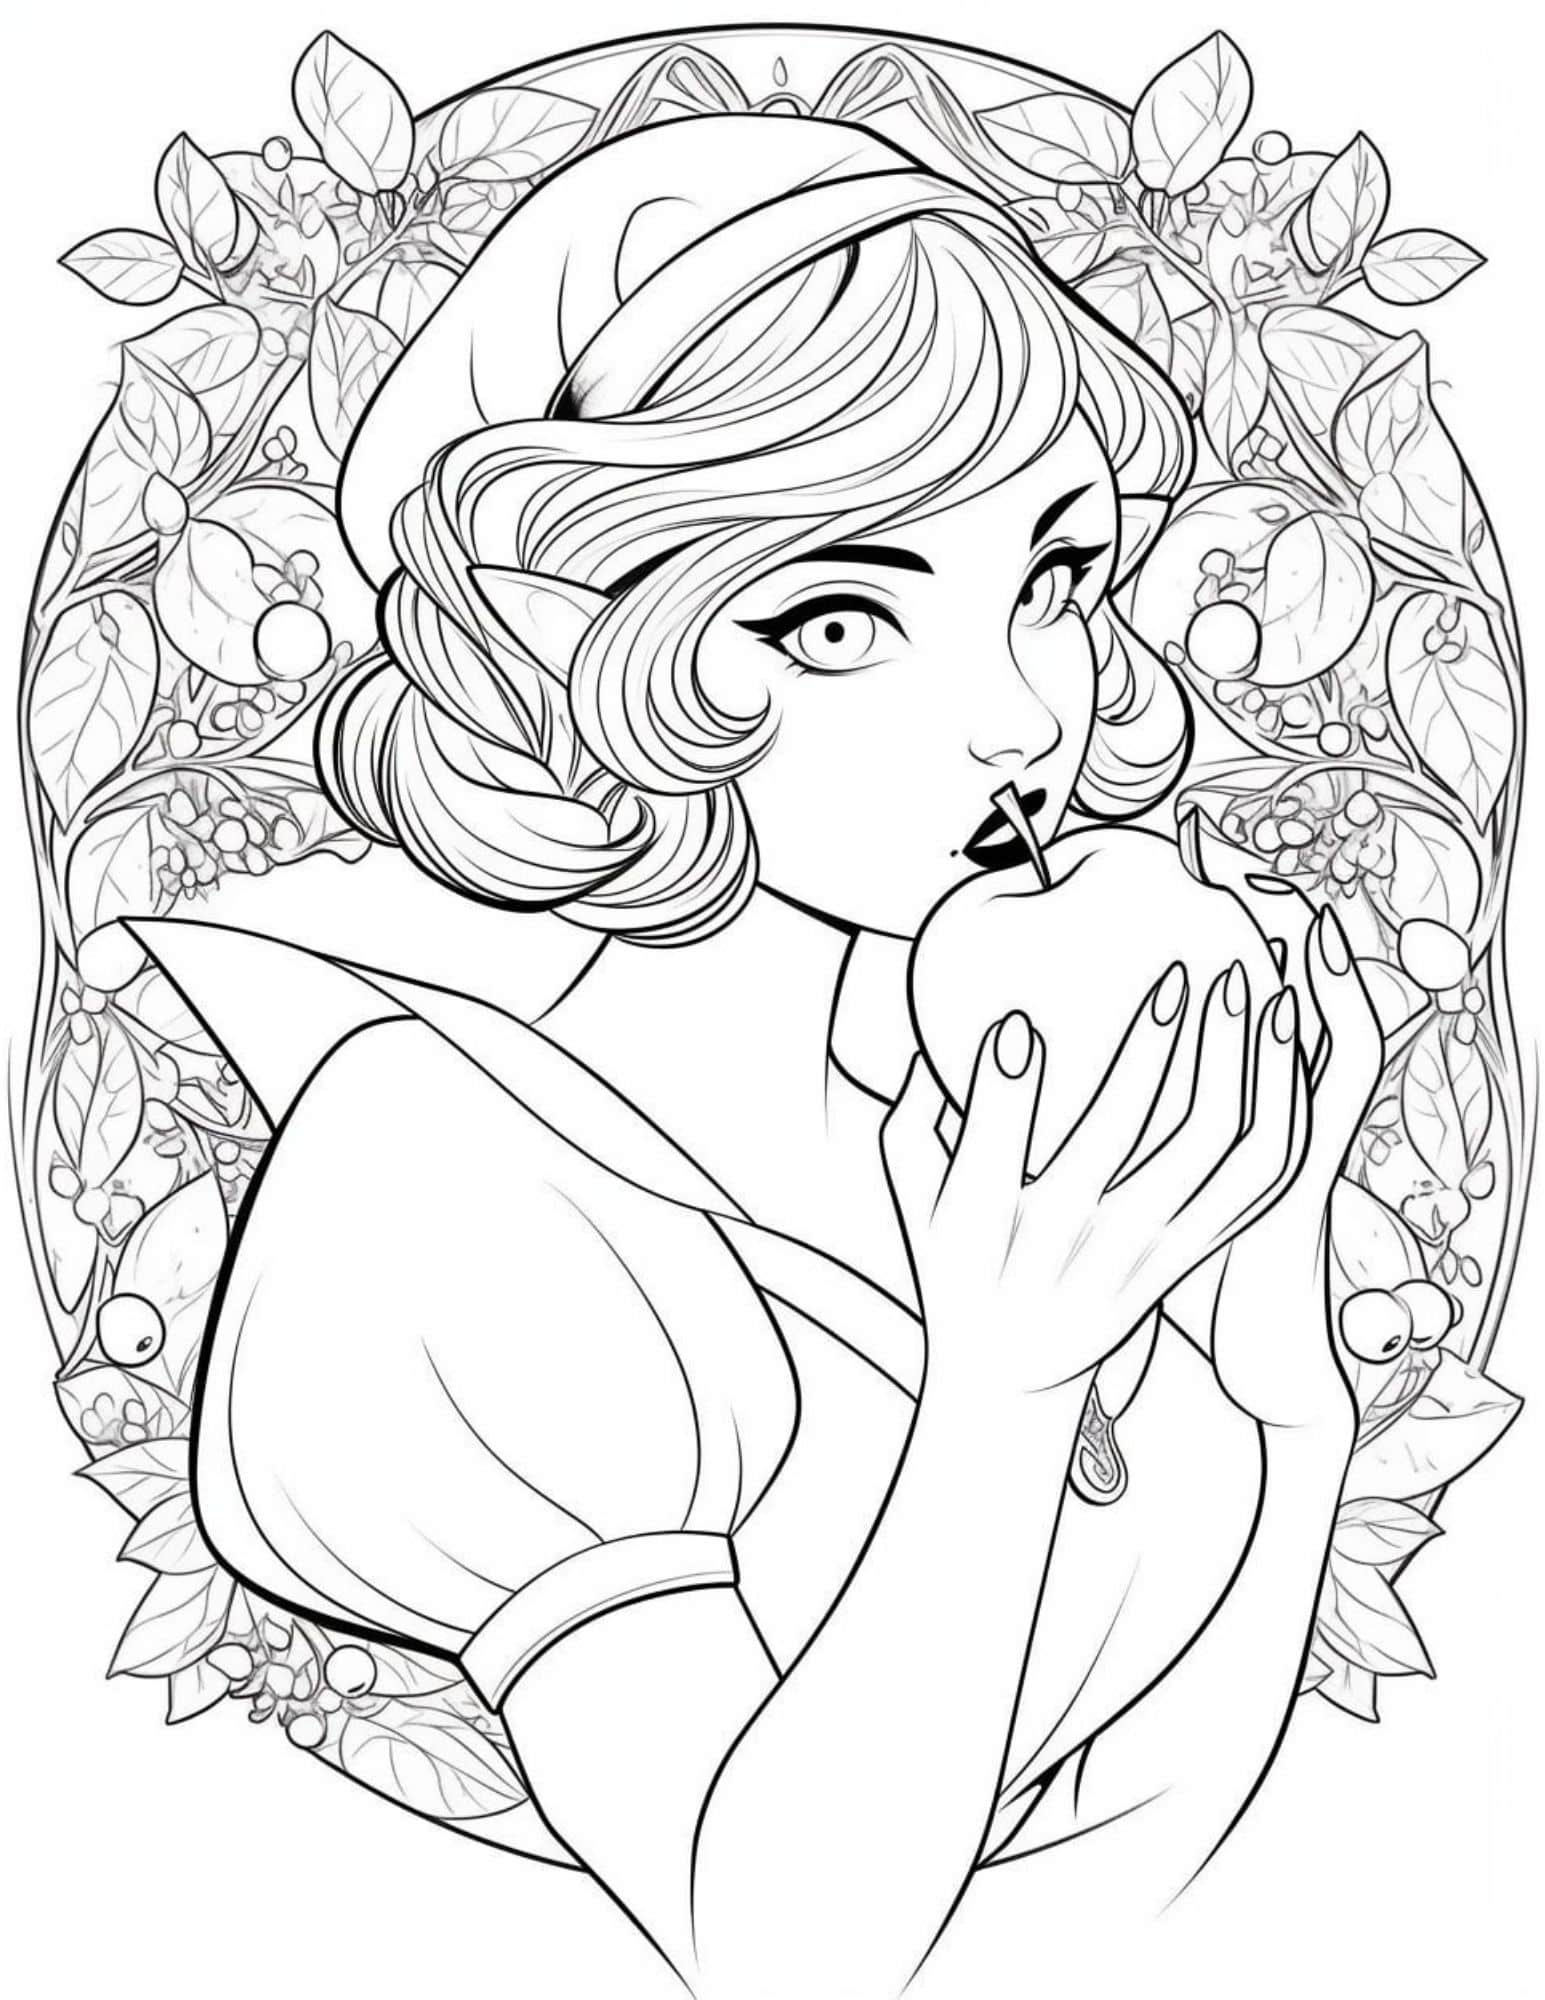 Gorgeous princess coloring pages for kids and adults